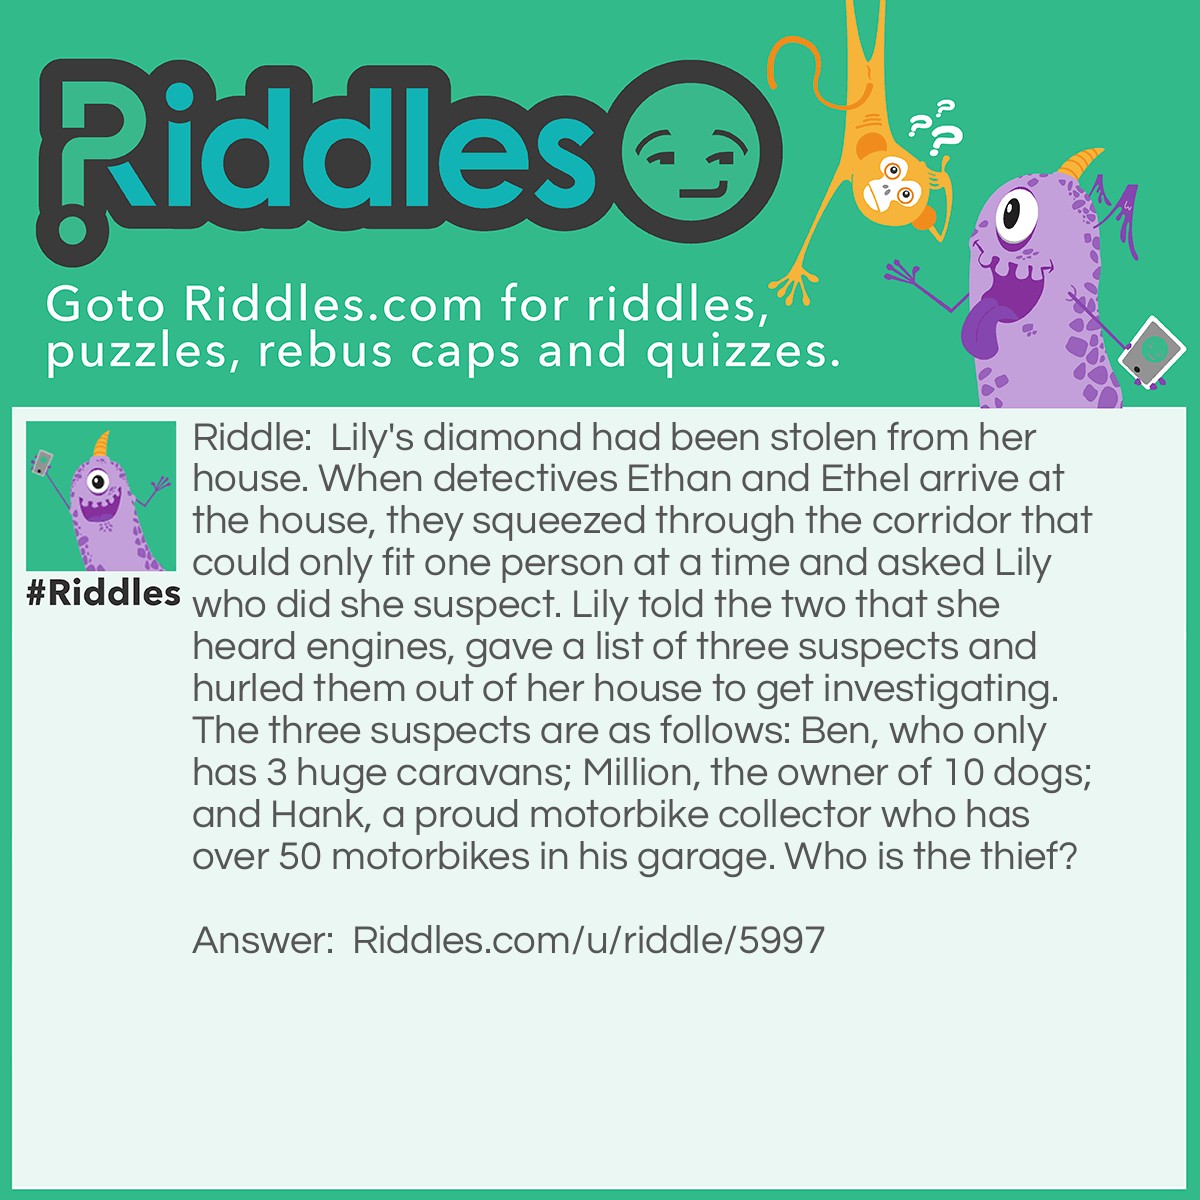 Riddle: Lily's diamond had been stolen from her house. When detectives Ethan and Ethel arrive at the house, they squeezed through the corridor that could only fit one person at a time and asked Lily who did she suspect. Lily told the two that she heard engines, gave a list of three suspects and hurled them out of her house to get investigating. The three suspects are as follows: Ben, who only has 3 huge caravans; Million, the owner of 10 dogs; and Hank, a proud motorbike collector who has over 50 motorbikes in his garage. Who is the thief? Answer: We know that the corridor leading into Lily's house can only fit one person at a time, so it cannot be Ben whose caravans obviously can't go into the house. We know that Lily heard engines, so it can't be Million, as she's only got dogs. So the only one left is HANK, who can both produce engine noises and get into that narrow corridor at the SAME time using his motorbike.